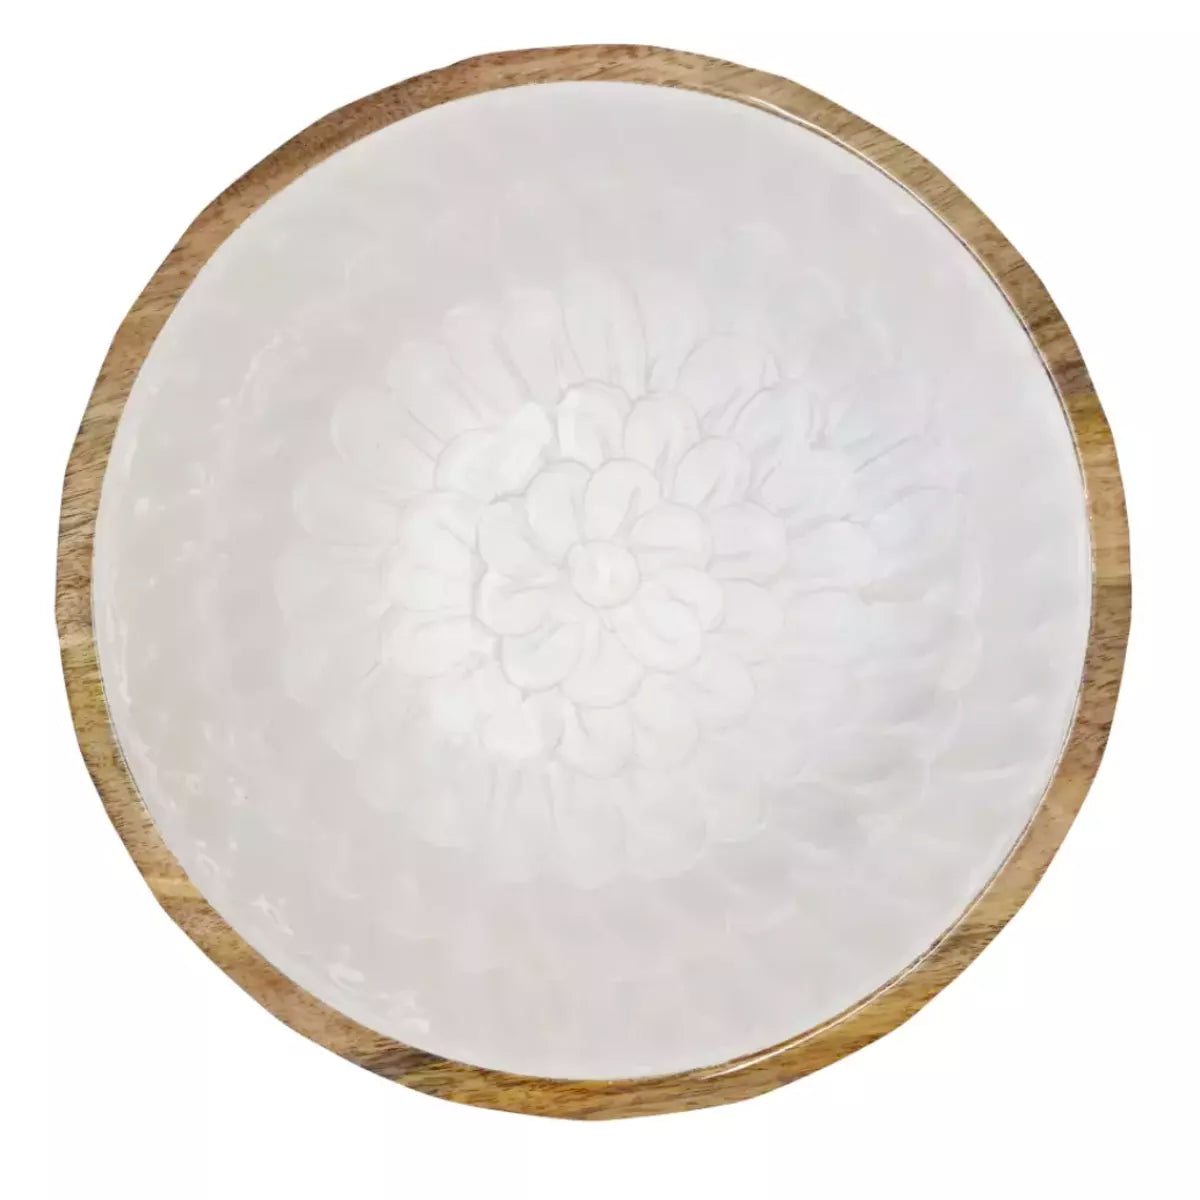 A white enamel coated j.elliot Como Salad Bowl with an embossed pearl design on a wooden base.